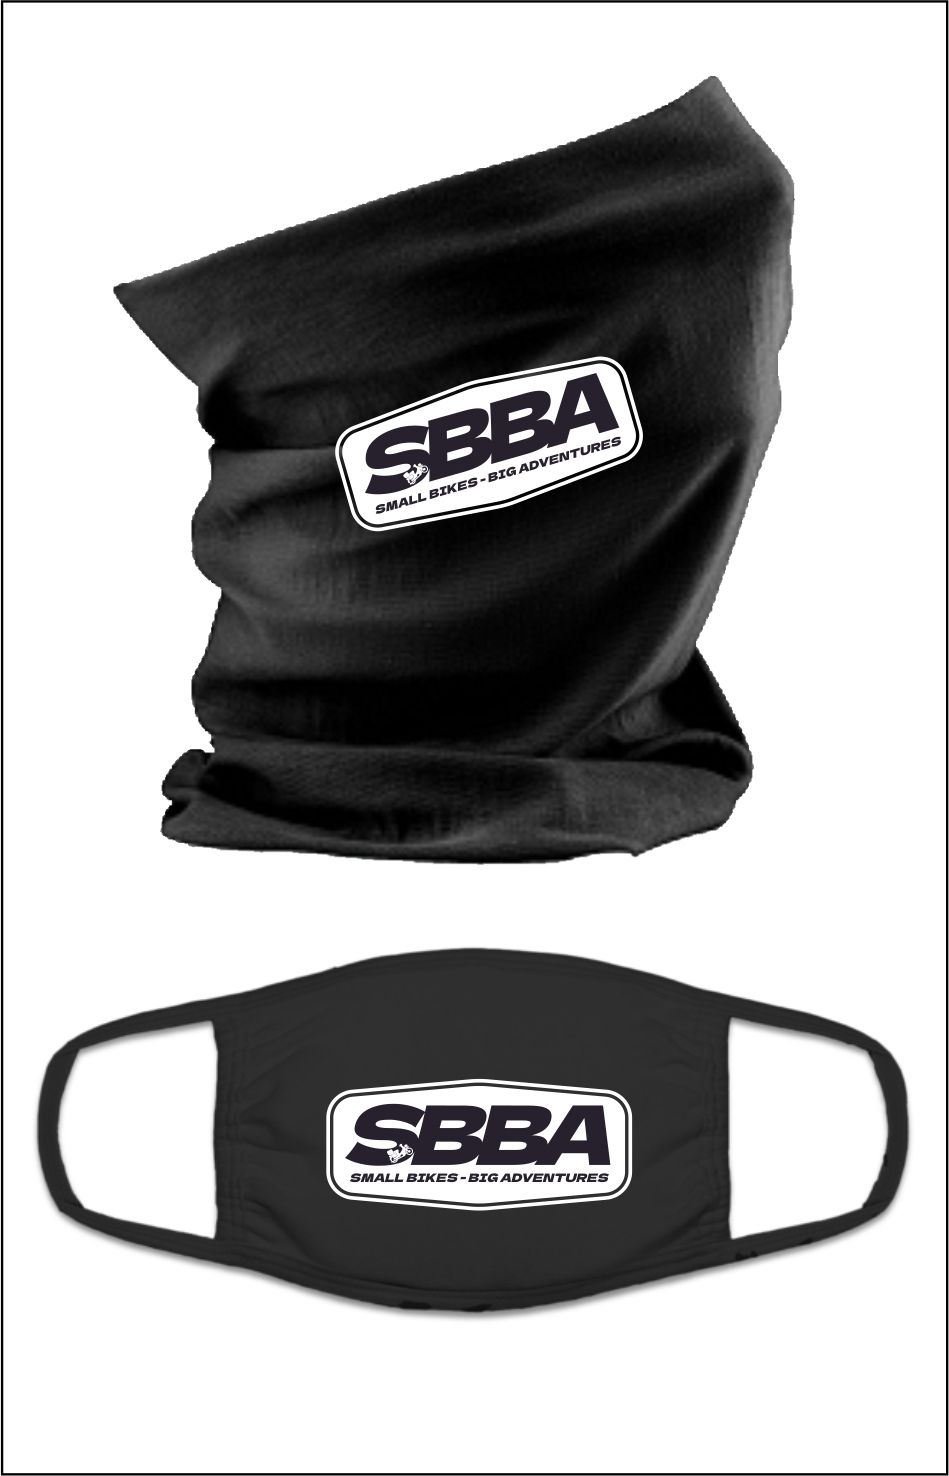 SBBA Printed Face Covering